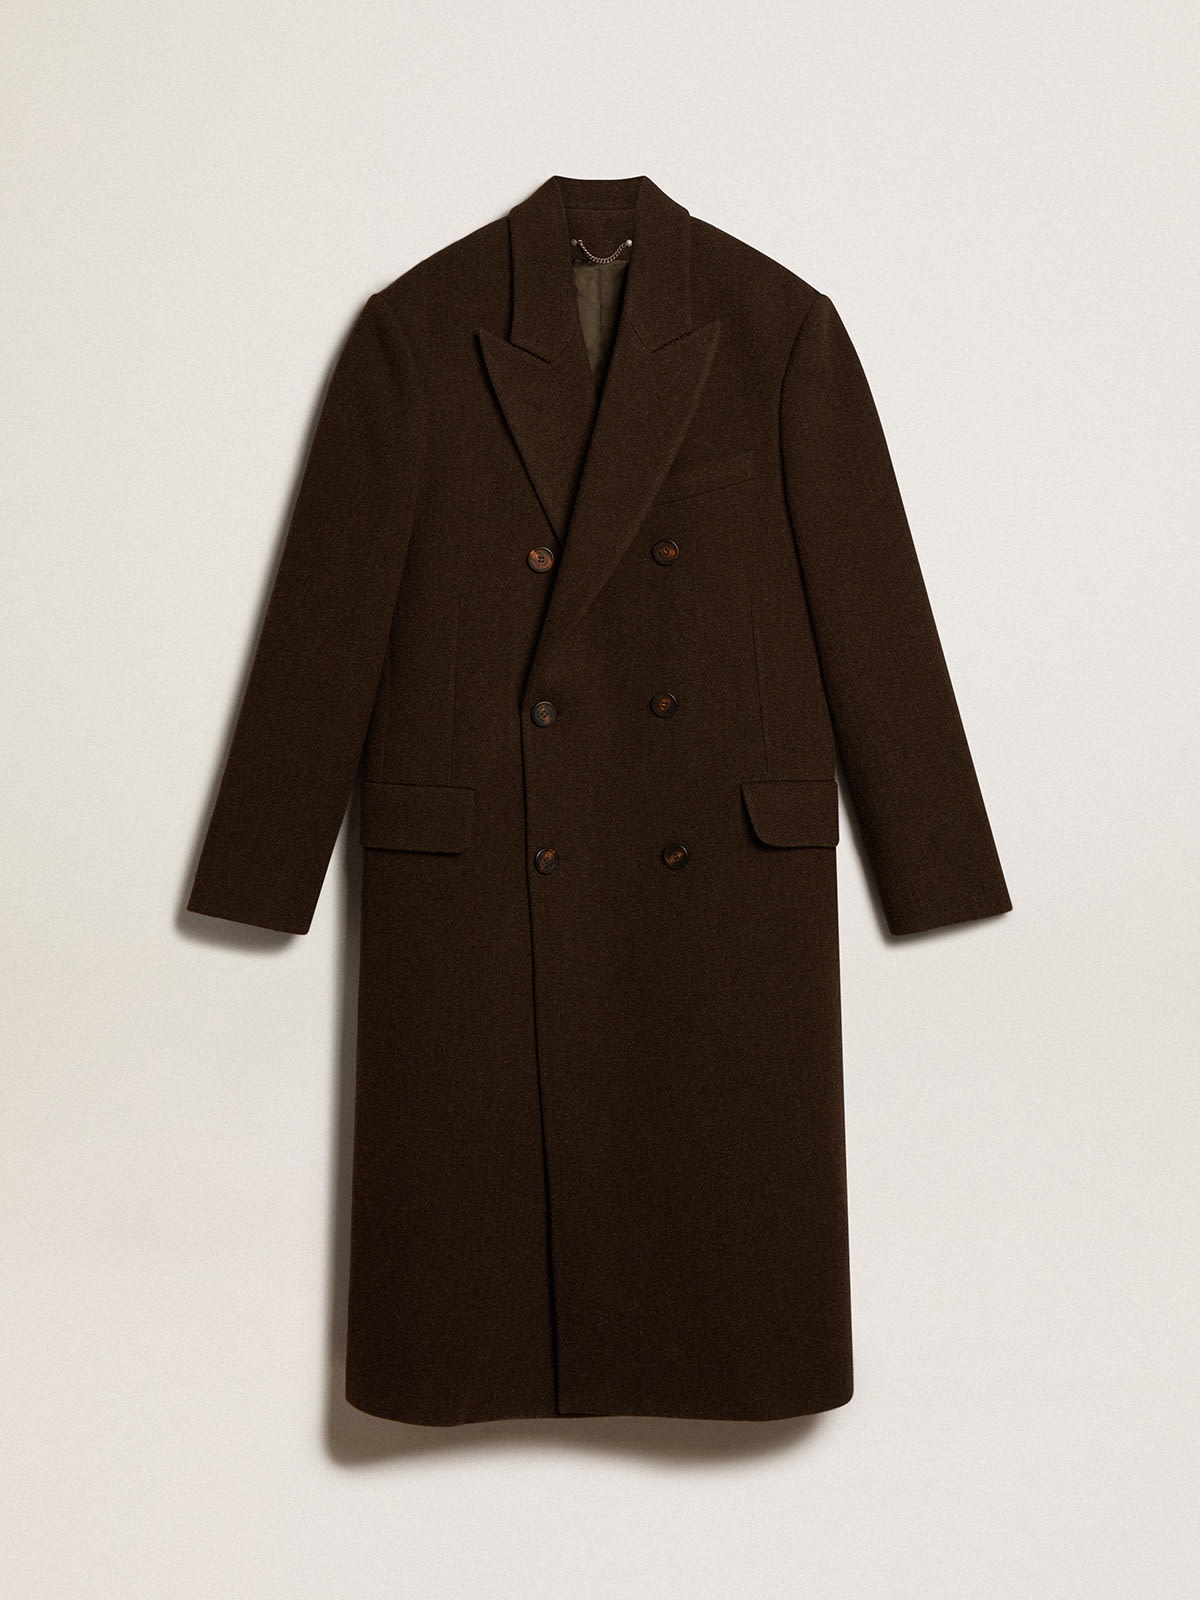 Men’s double-breasted coat in bark-colored wool - 1